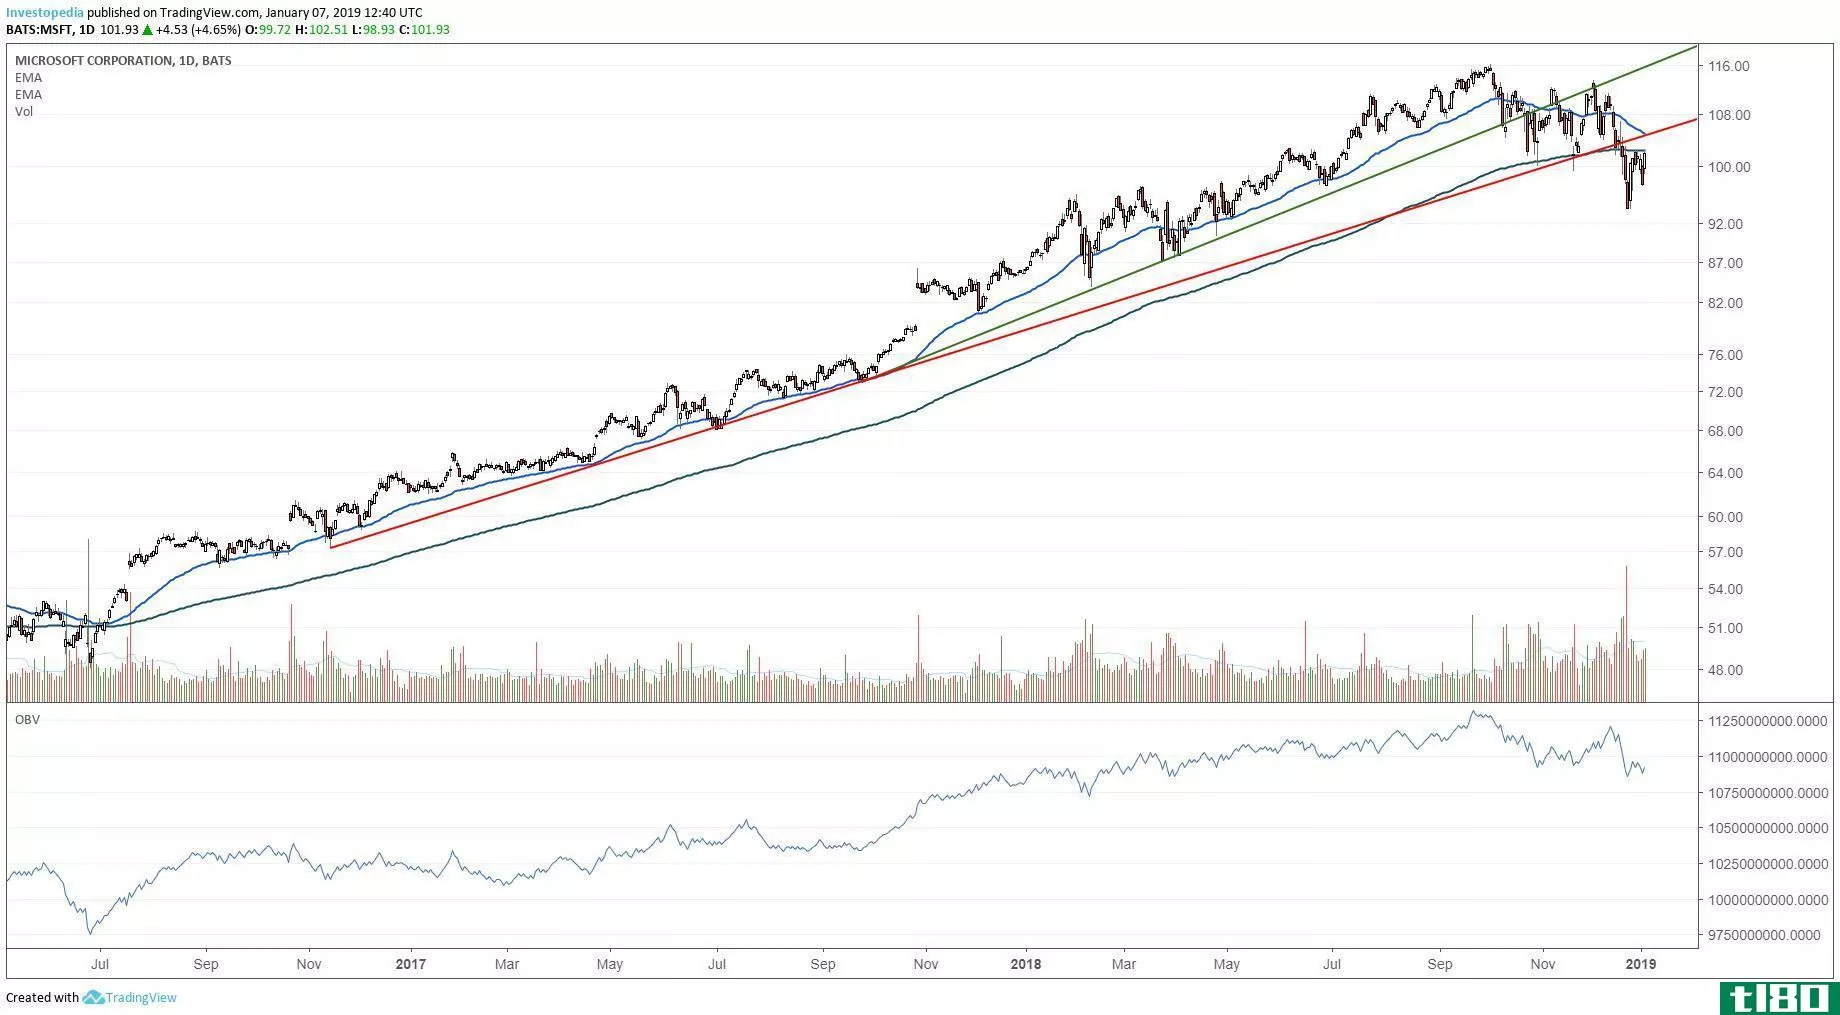 Short-term technical chart showing the share price performance of Microsoft Corporation (MSFT)